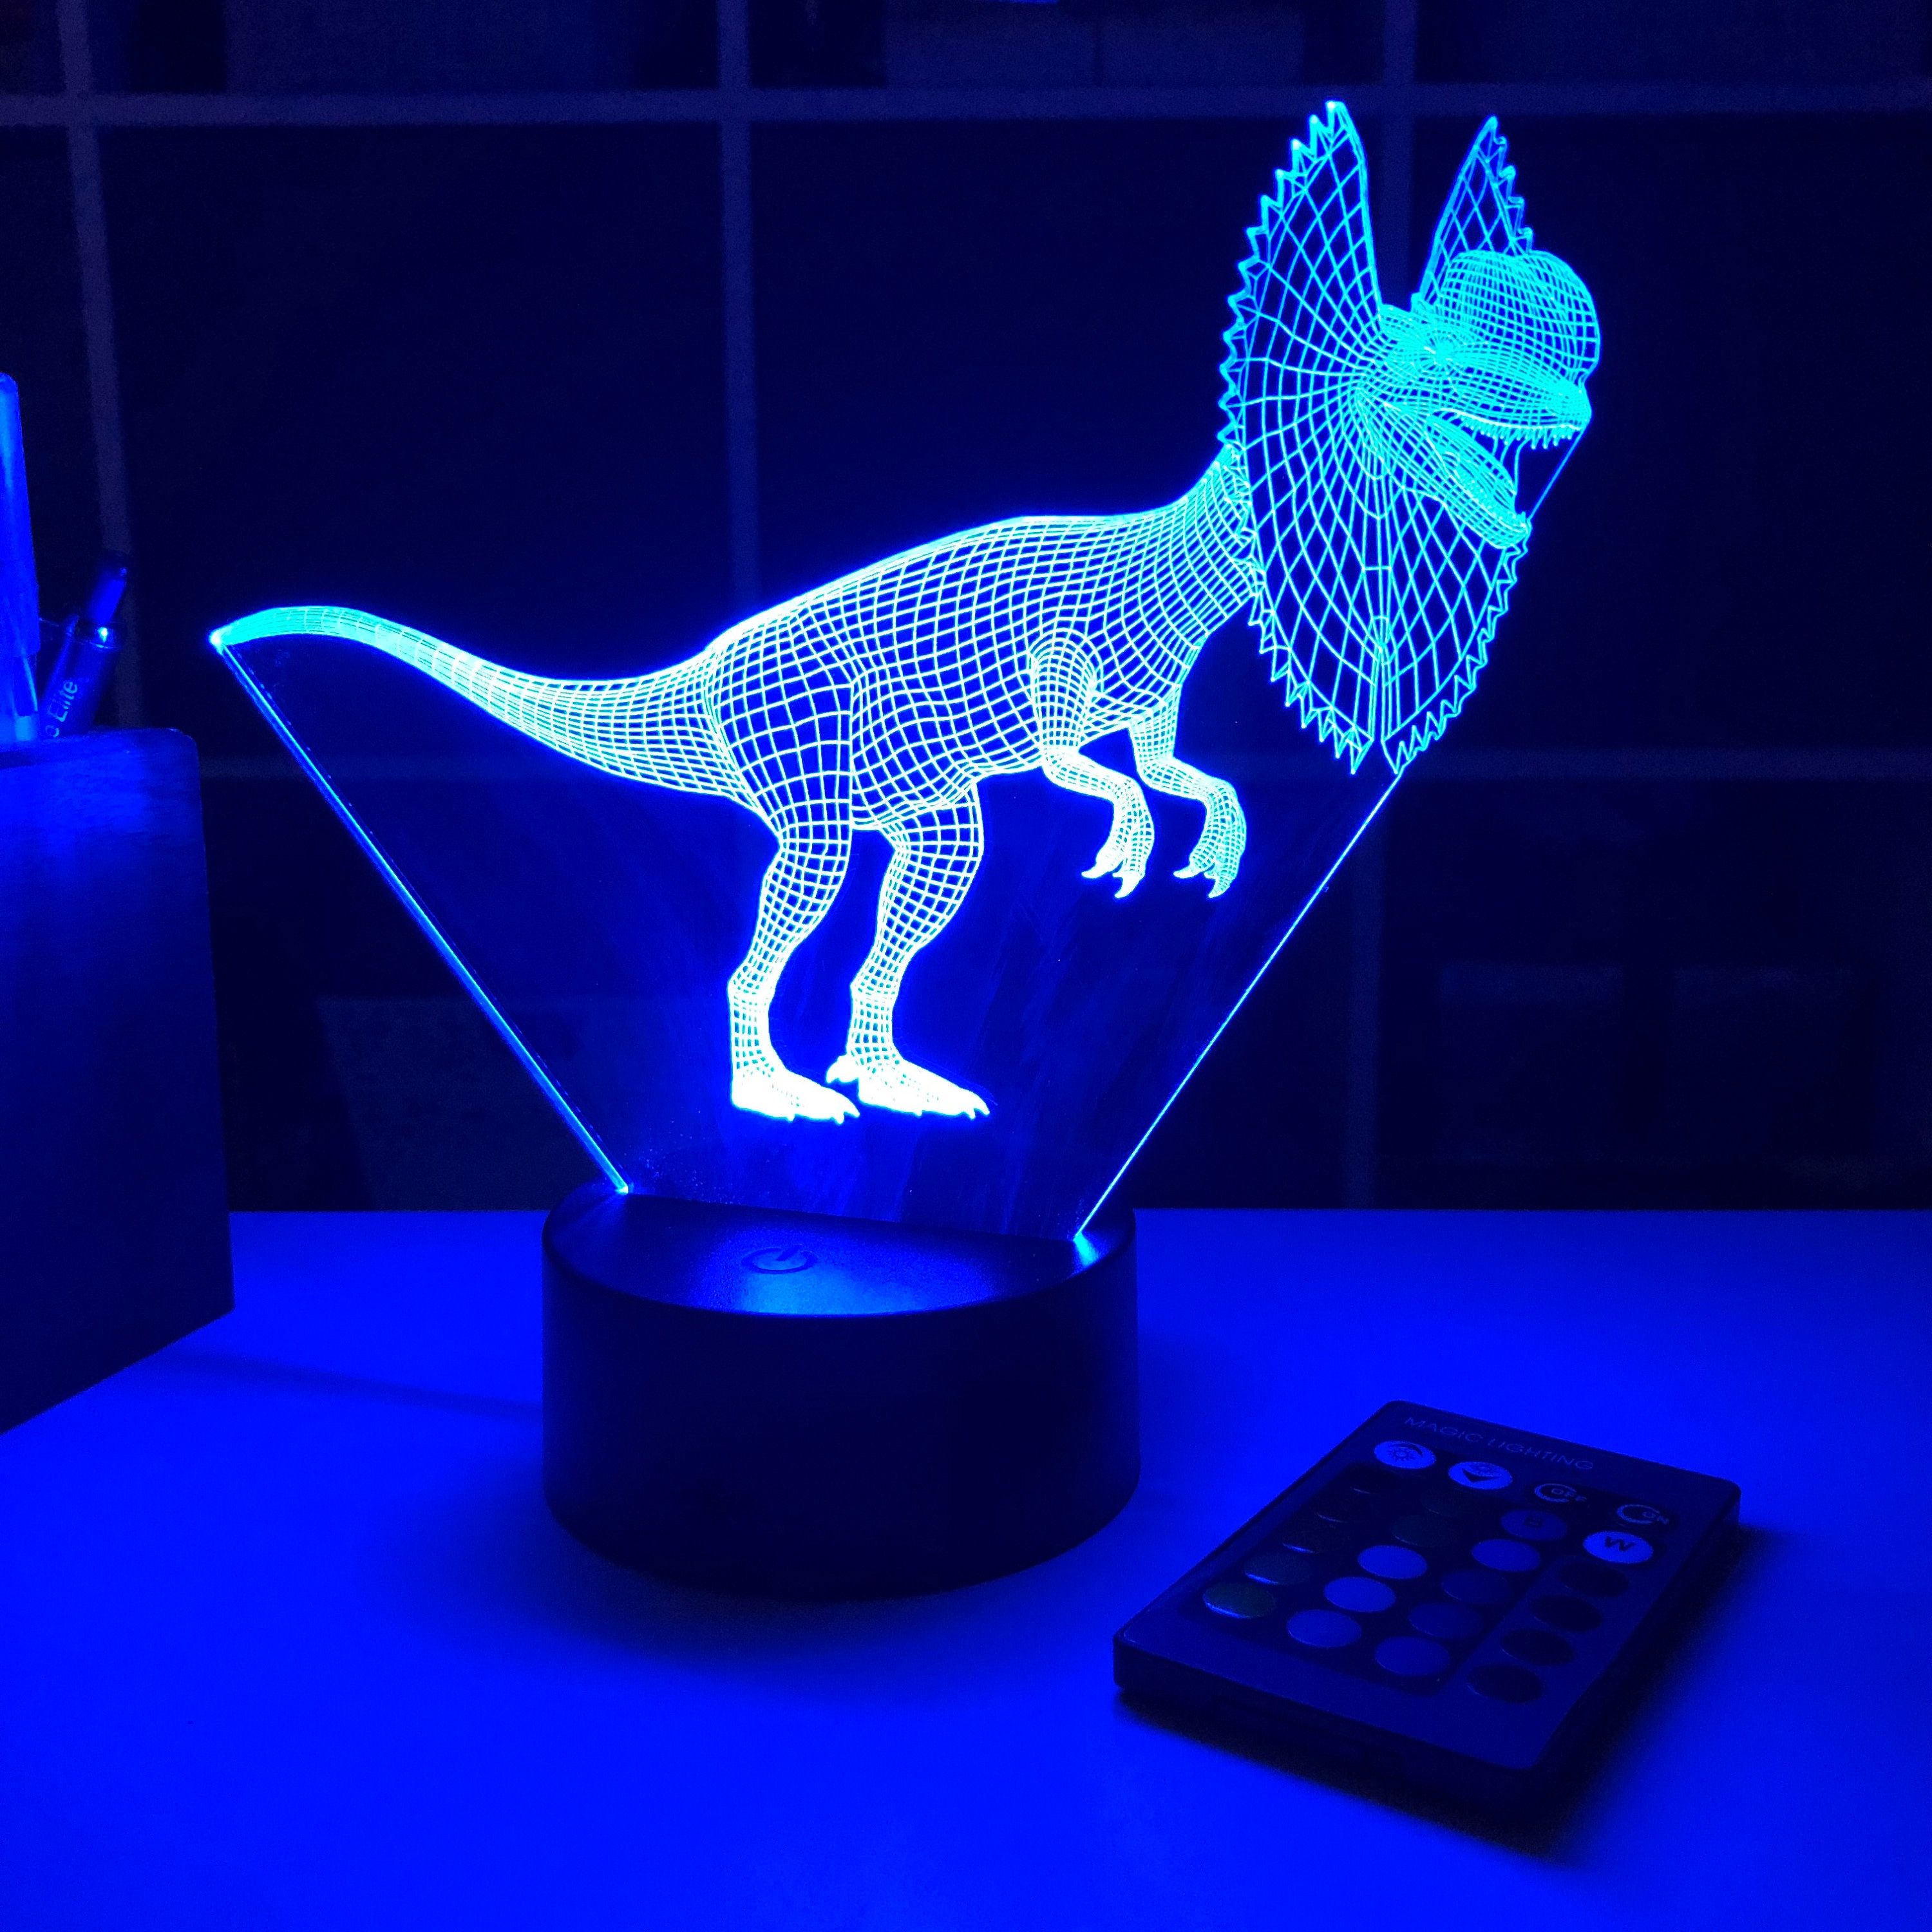 Details about   3D illusion Dinosaur LED USB table Night Lamp Light Bedroom Decors Children Gift 